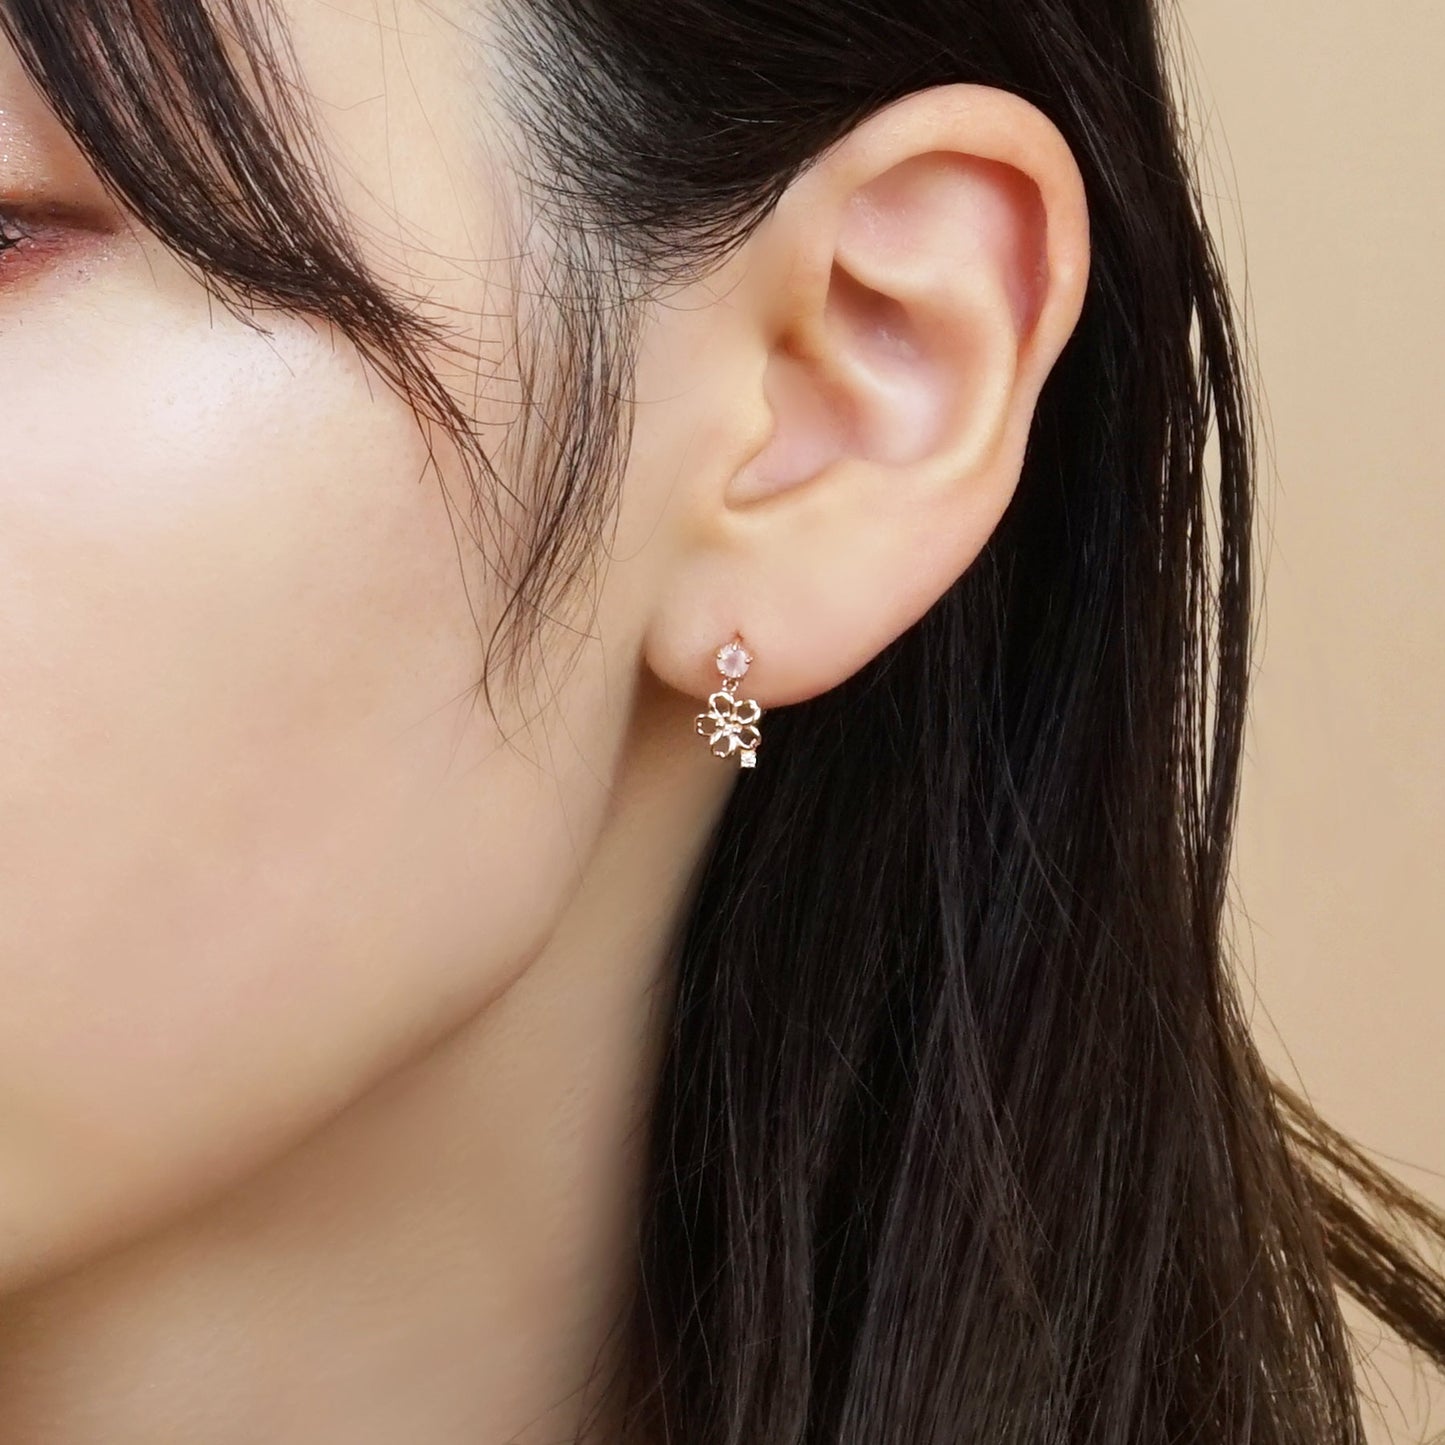 [Birth Flower Jewelry] April Cherry Blossoms Earrings (Watermark) - Model Image